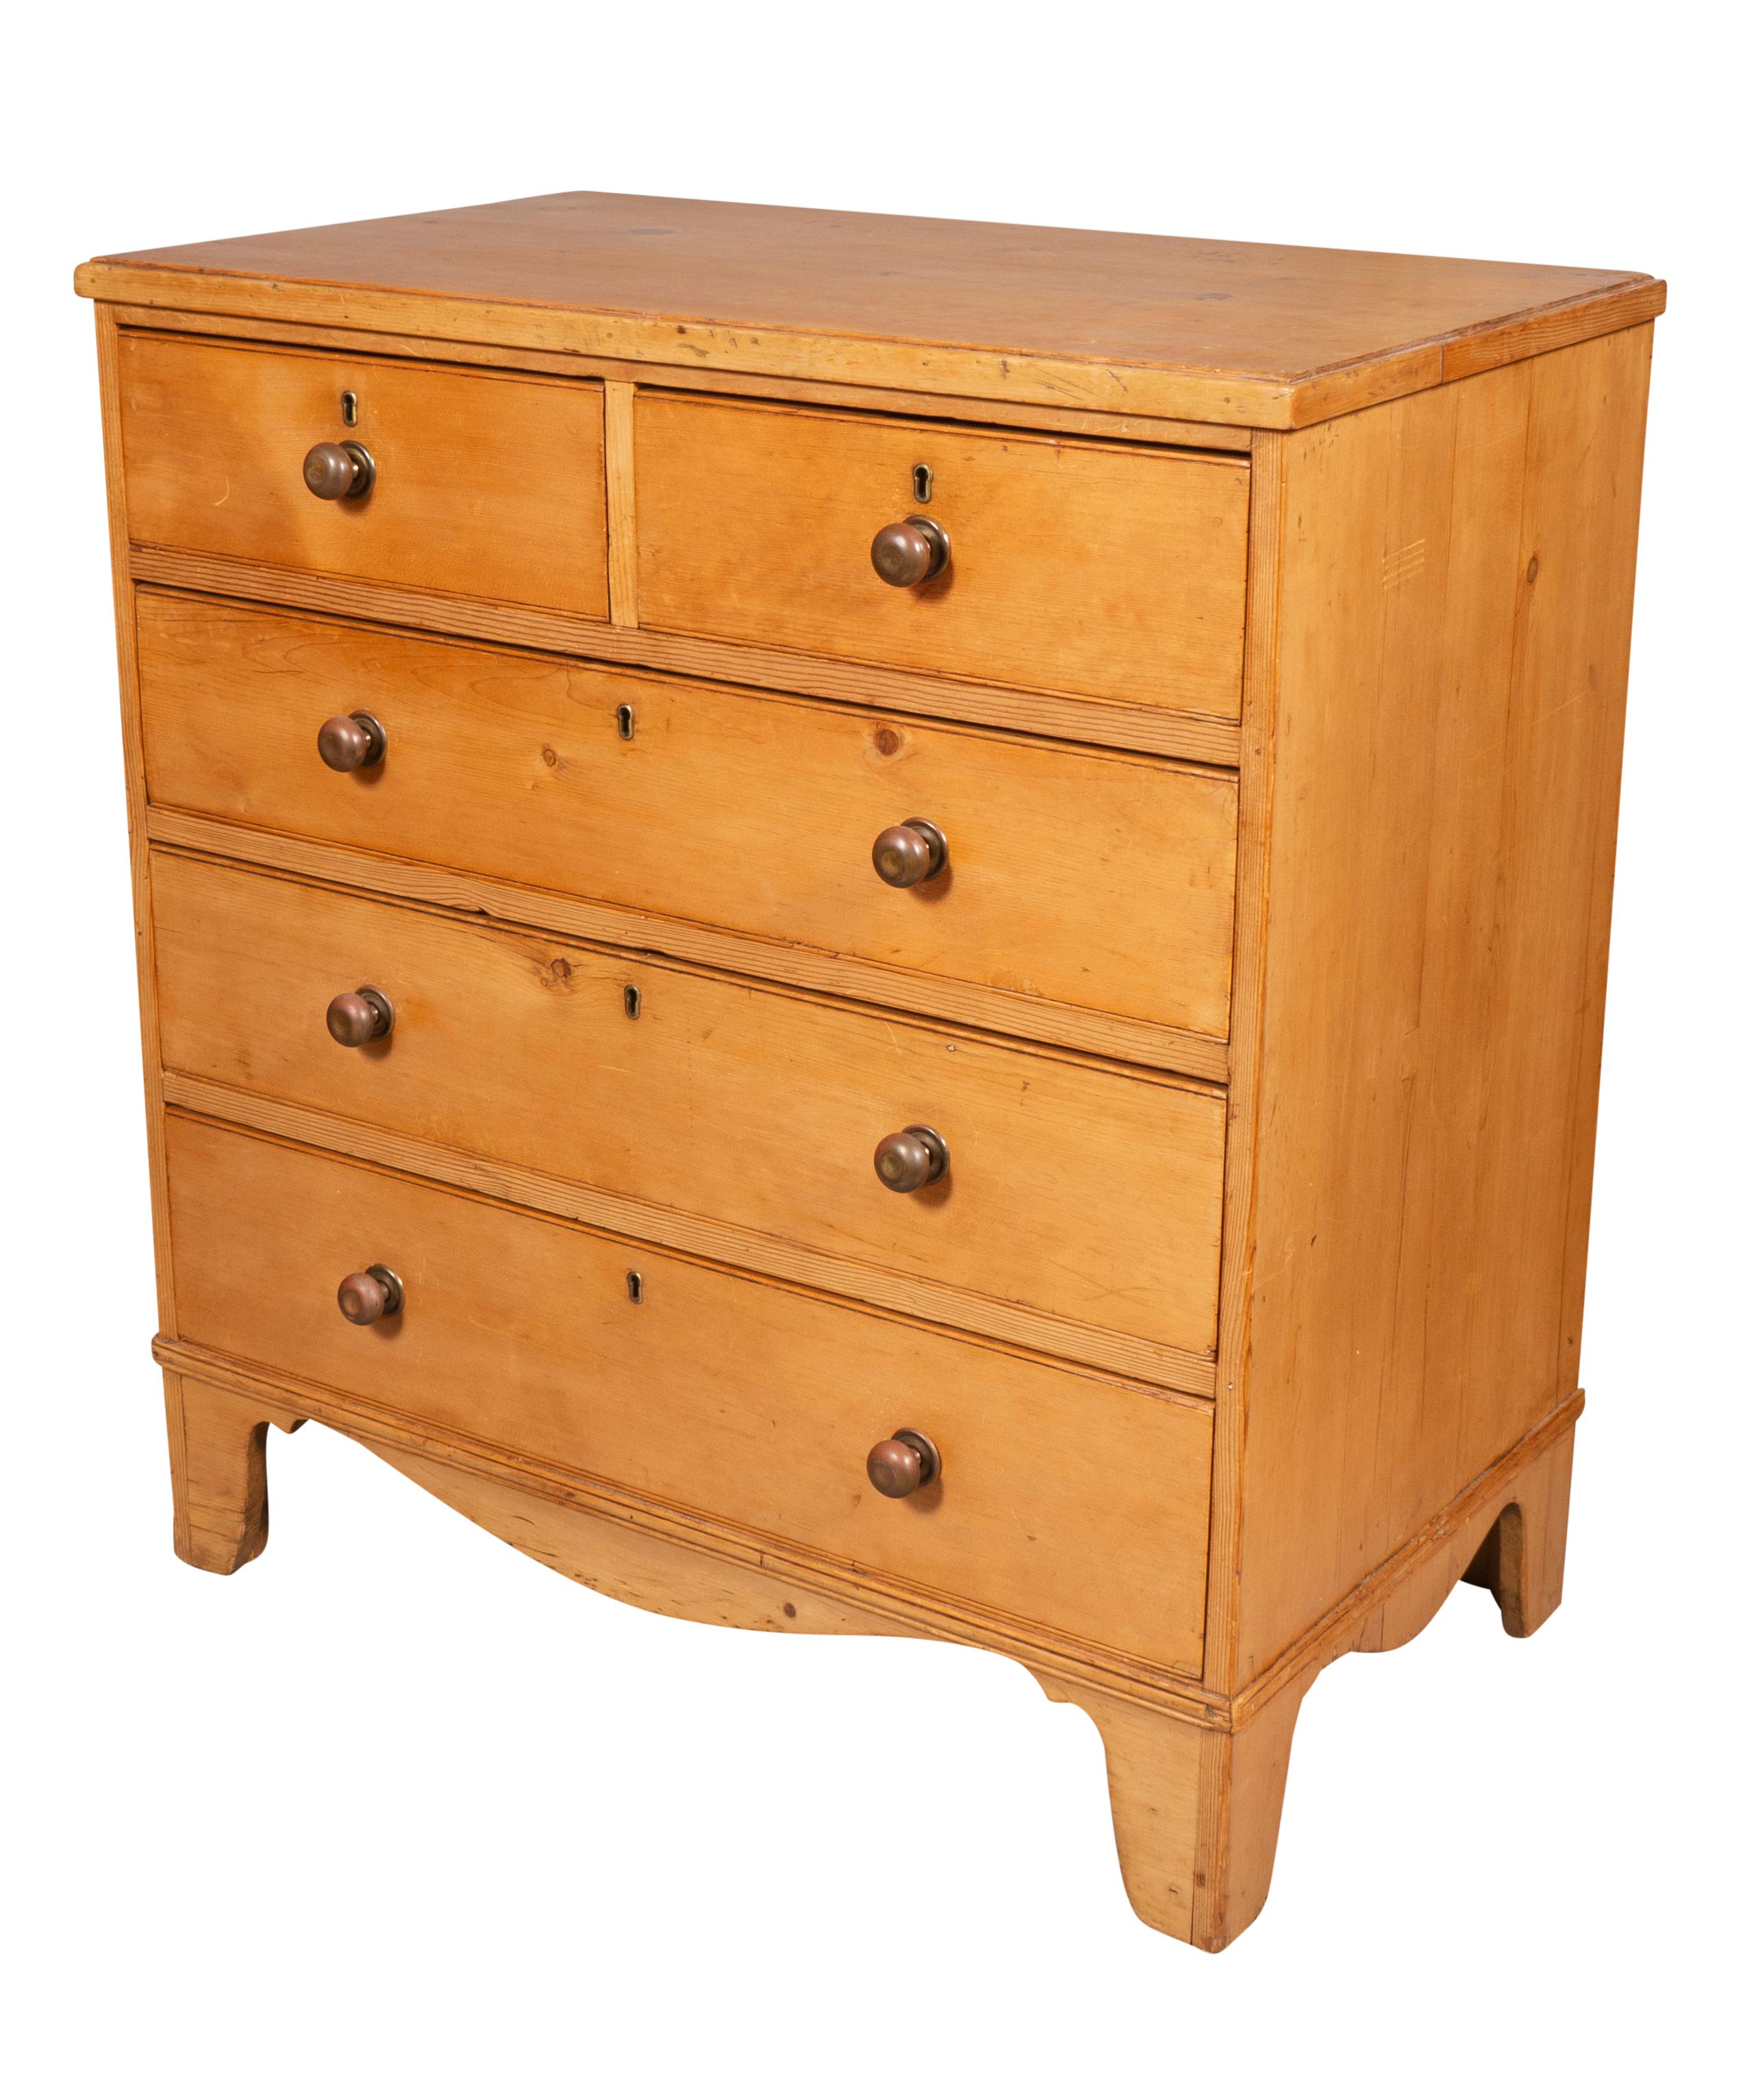 Late Georgian Pine Chest of Drawers 1